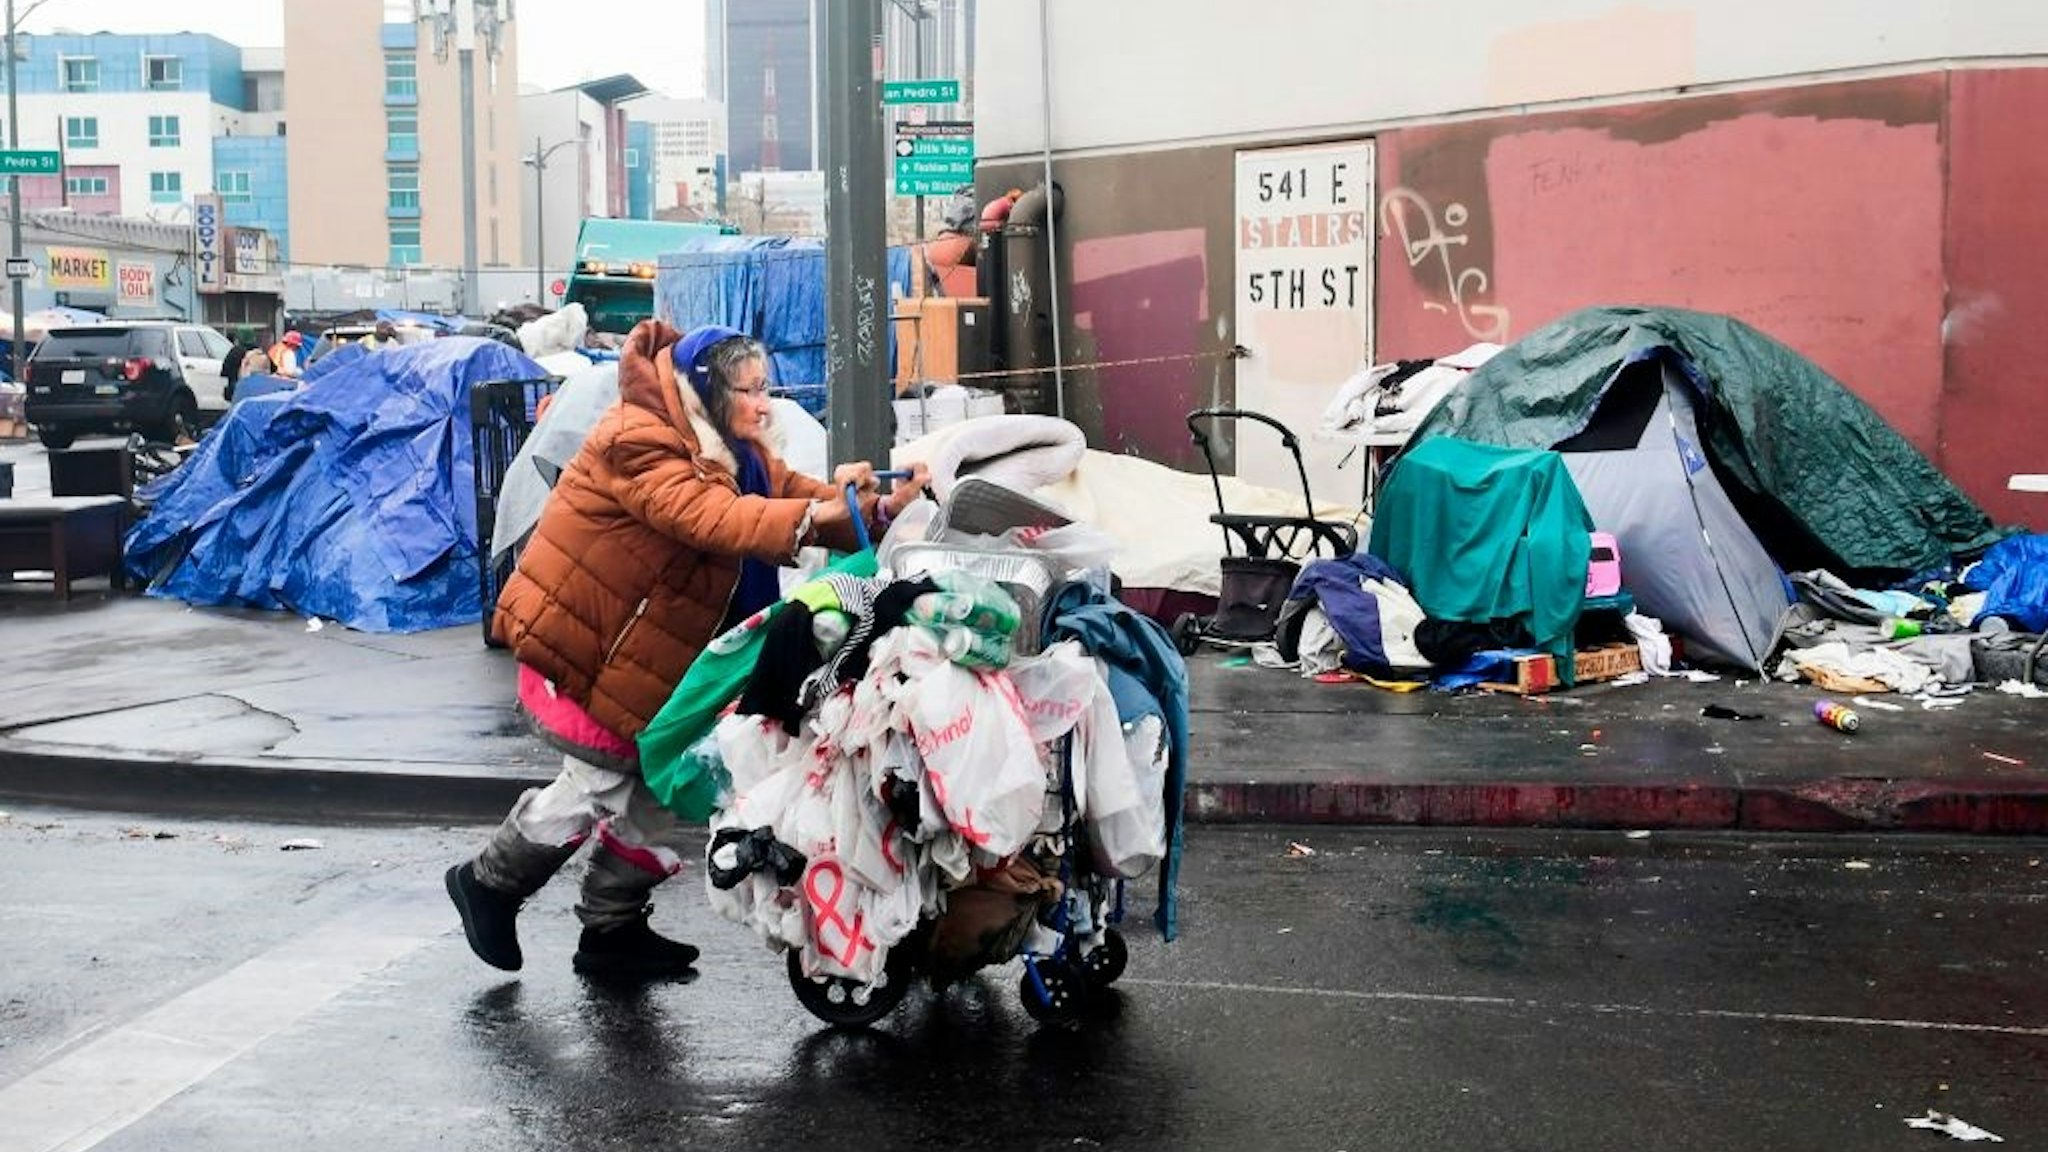 A homeless woman pushes her belongings past a row of tents on the streets of Los Angeles, California on February 1, 2021.